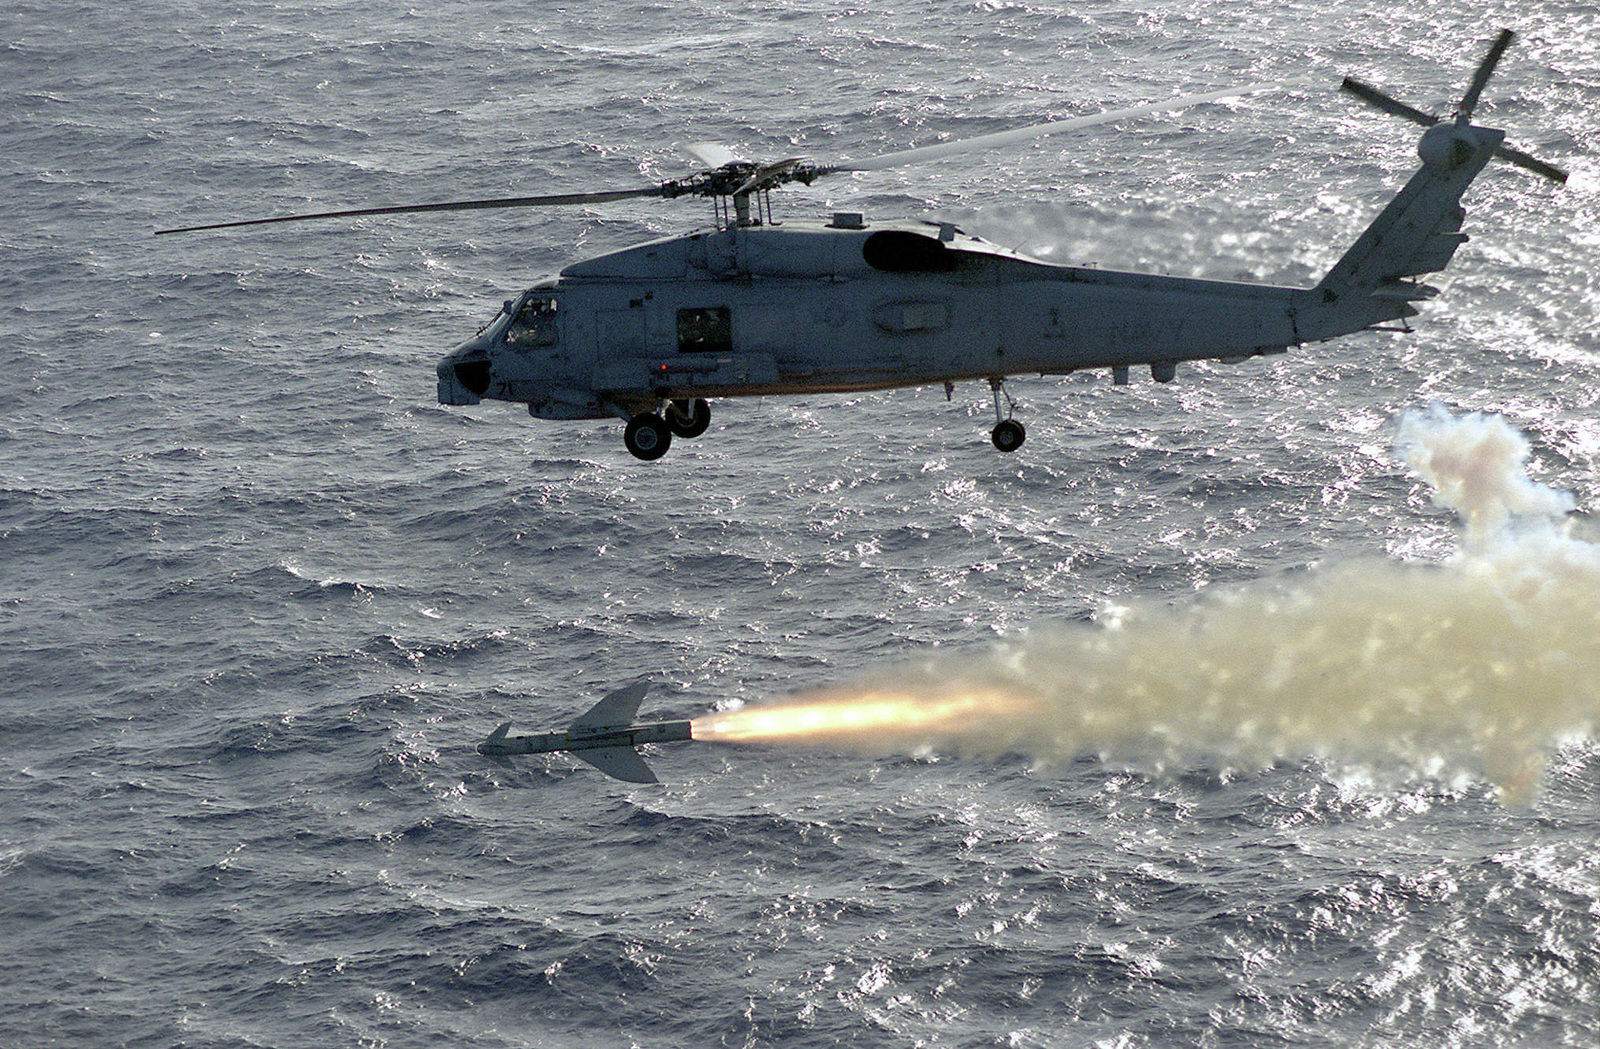 an-agm-119-penguin-missile-is-launched-against-a-practice-target-ship-from-b48a25-1600.jpg